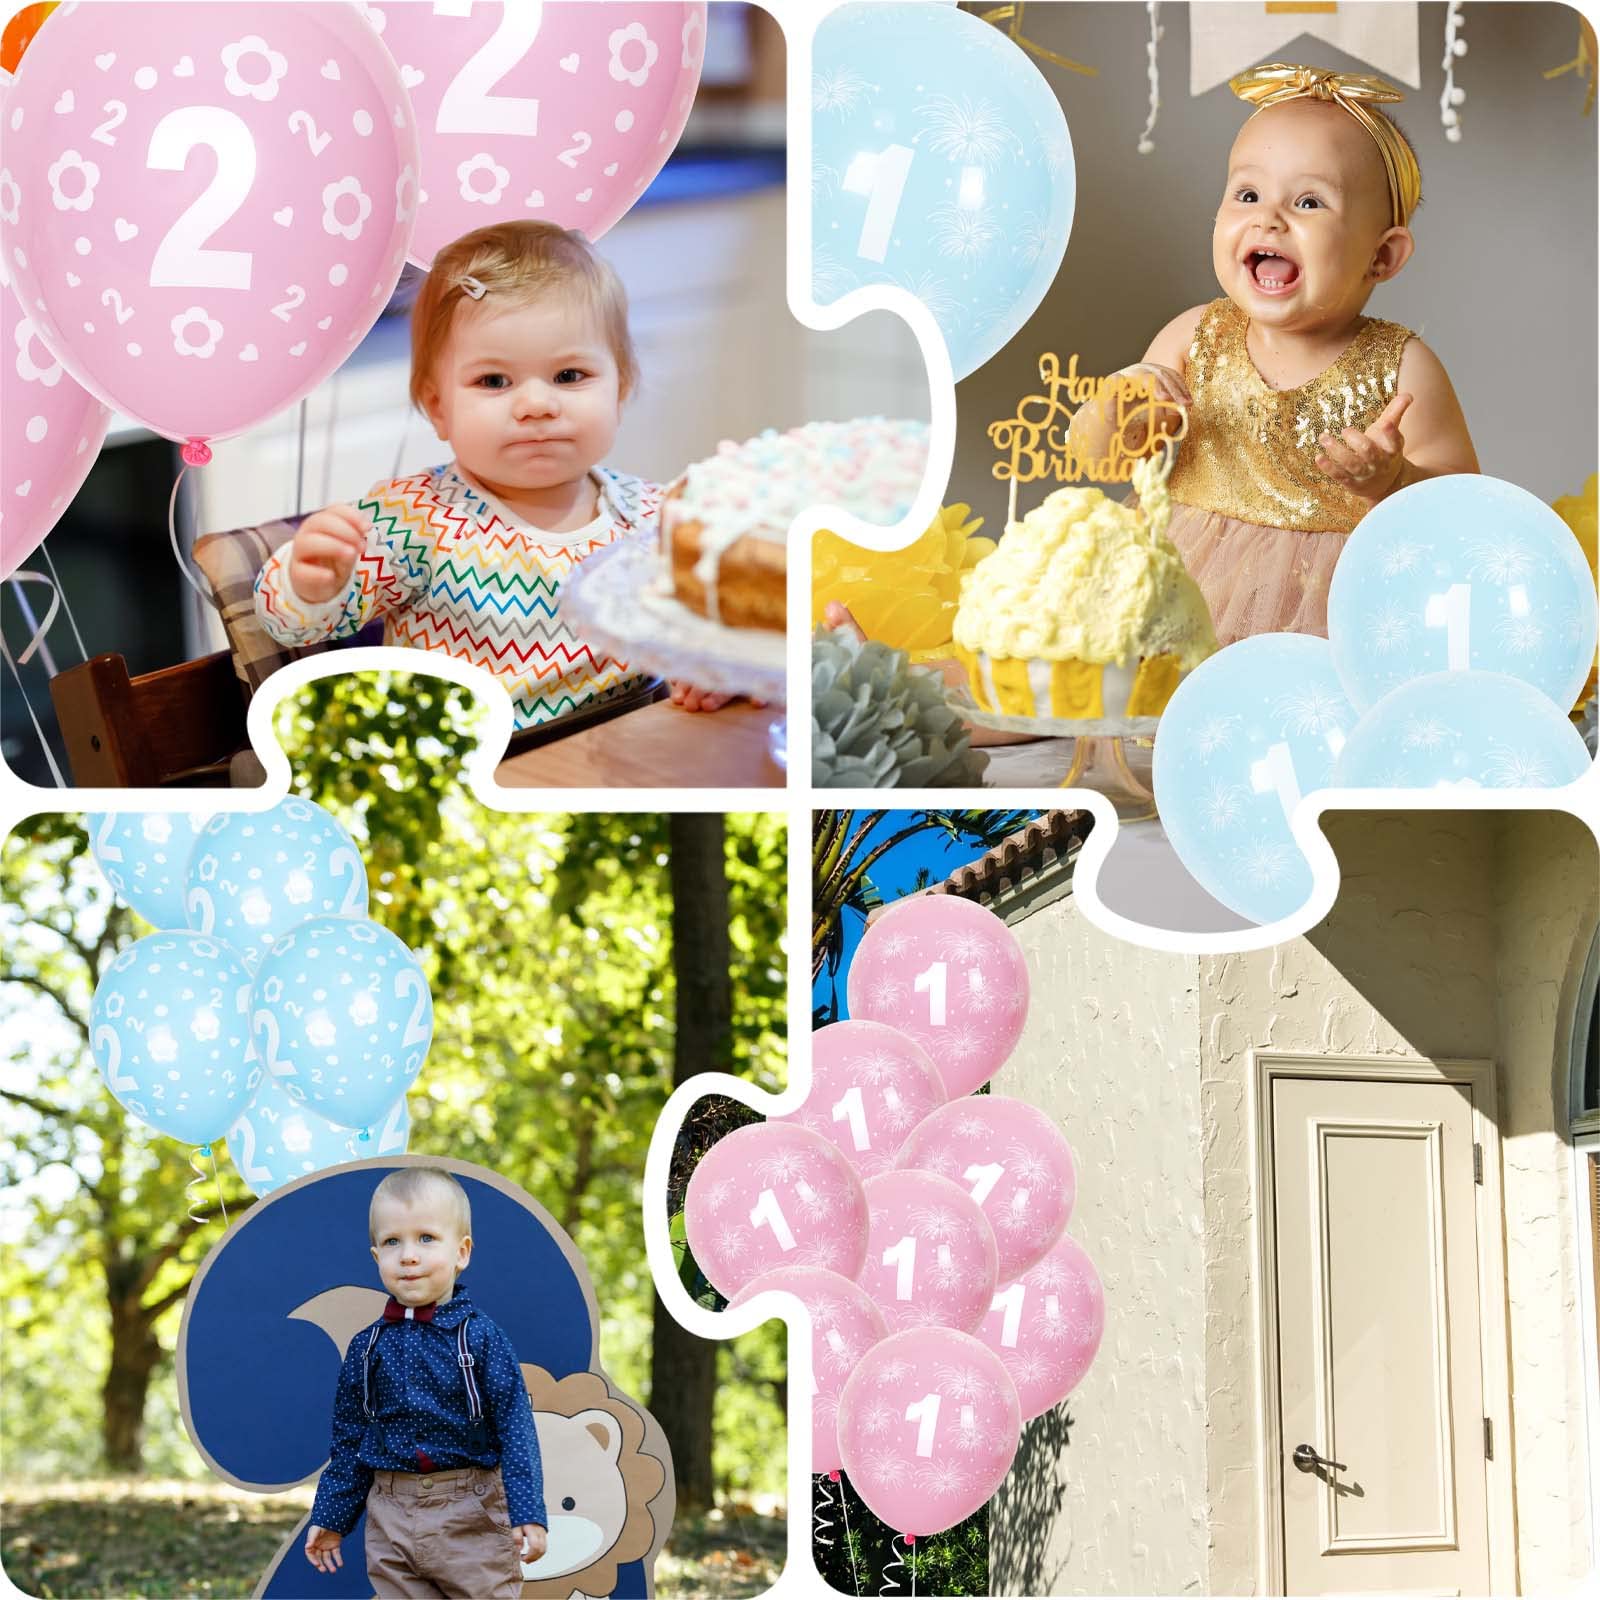 Yiran 2nd Birthday Balloons 2nd Birthday Decorations 12 inches Latex Pestel Baby Blue Happy 2nd Birthday Balloons for Boy's Baby Birthday Party Anniversary Decorations, Pack 12 with Balloon Spare & Ribbon